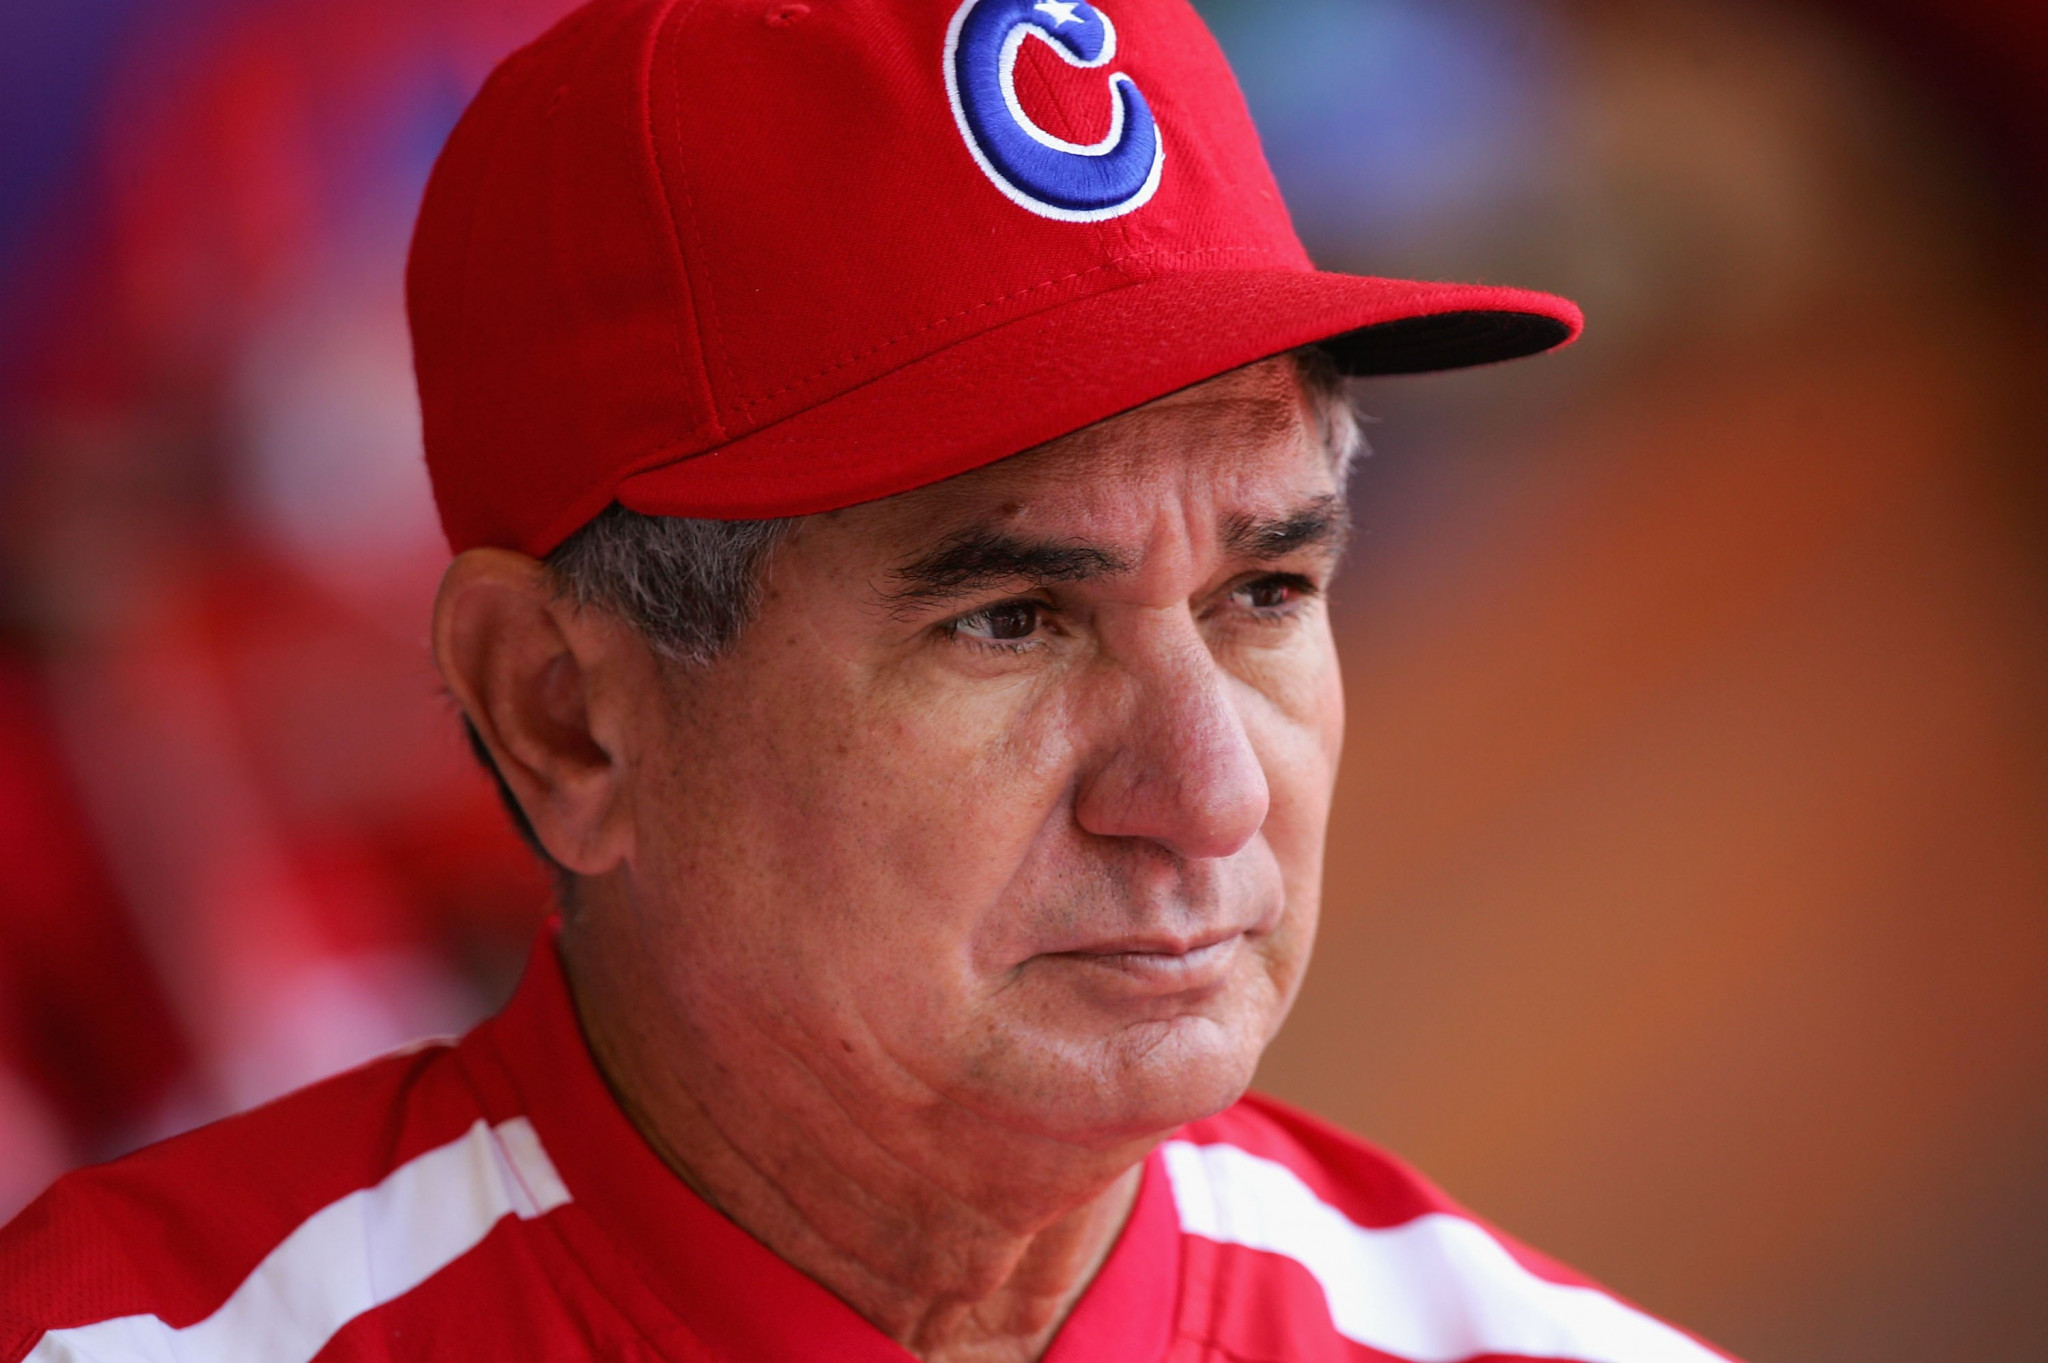 Cuban Baseball Federation President and Olympic gold medal-winning manager Velez dies from COVID-19